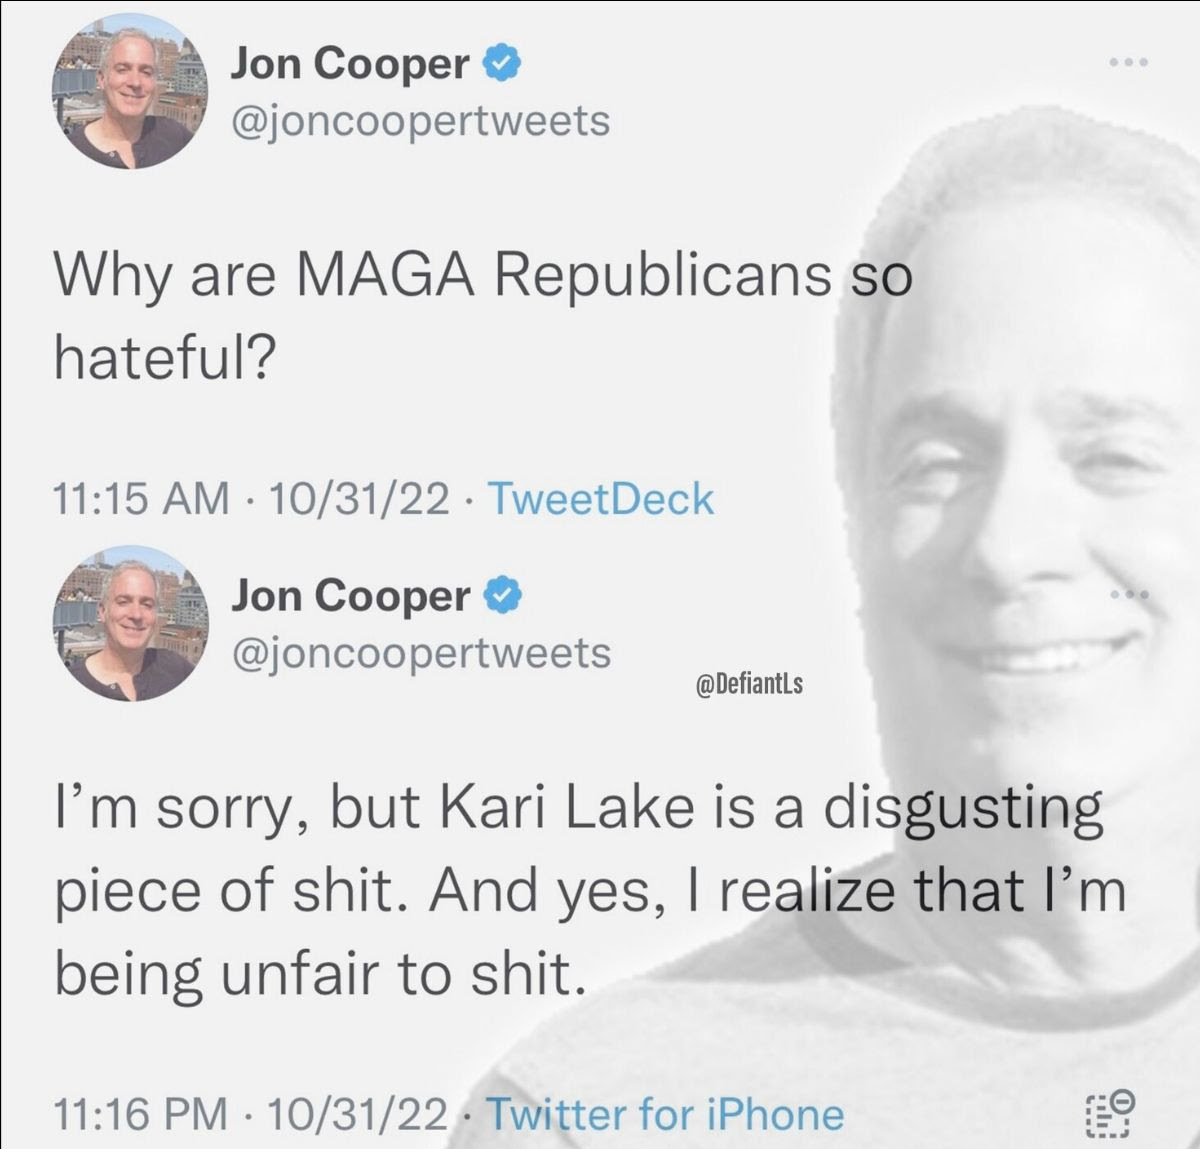 Hypocrite: Jon Cooper. First he decries MAGA Republicans as hateful. Then goes on a hateful rage against Kari Lake.